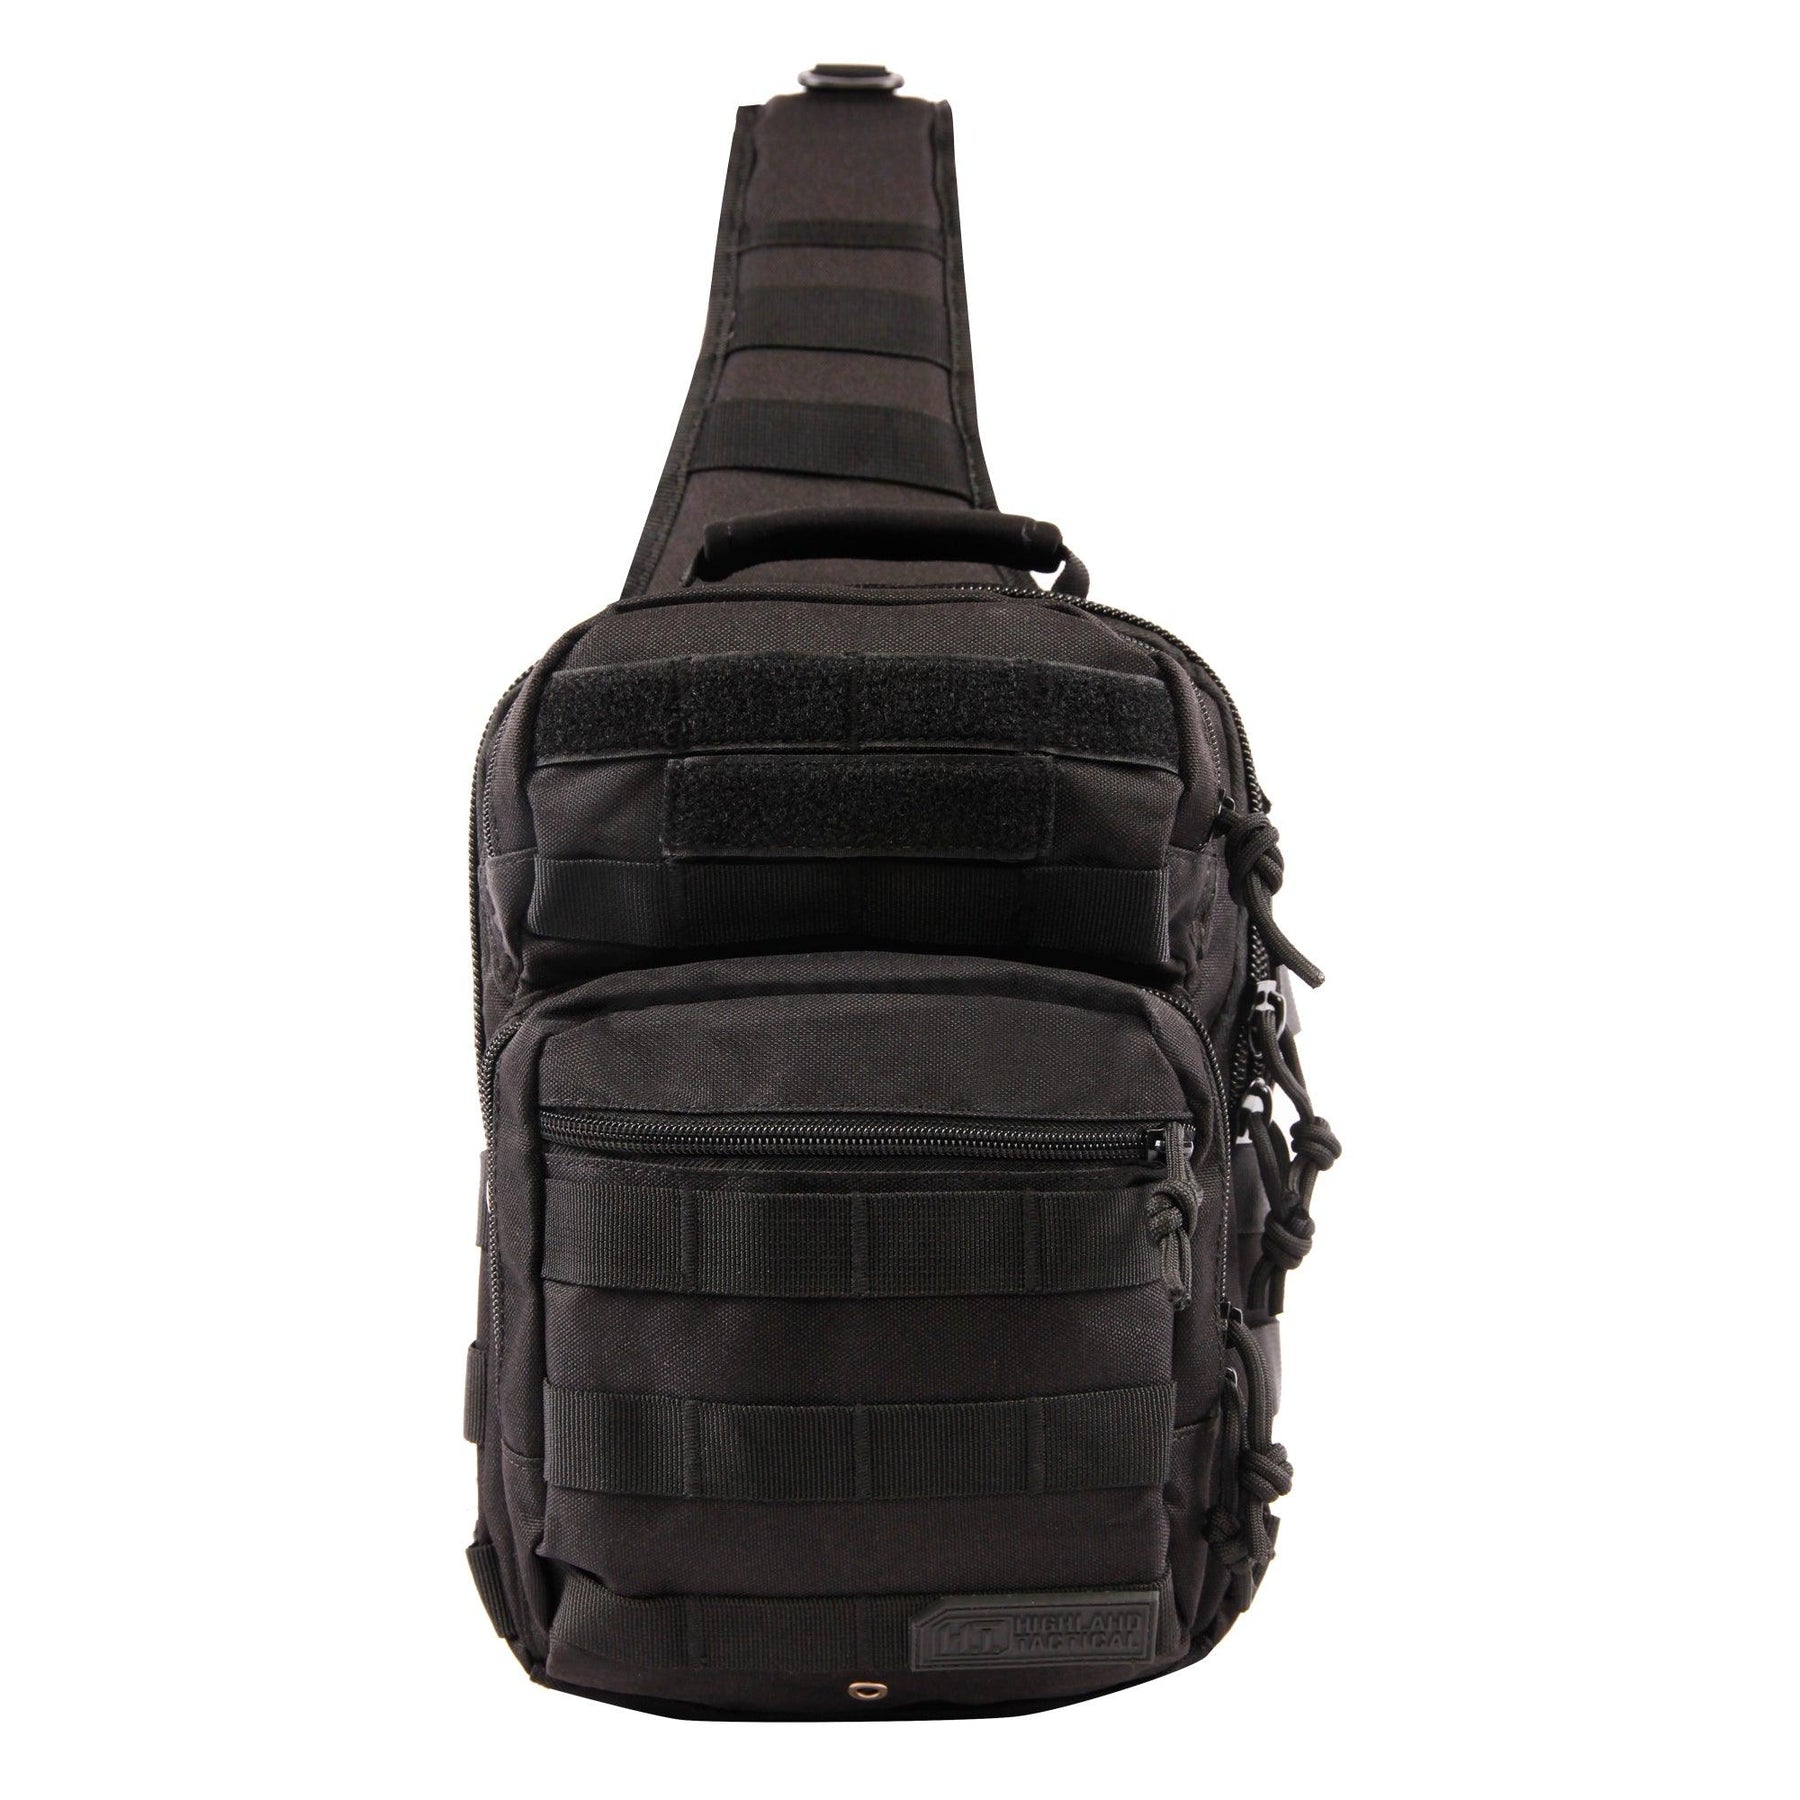 Tactical Sling Bags – Highland Tactical